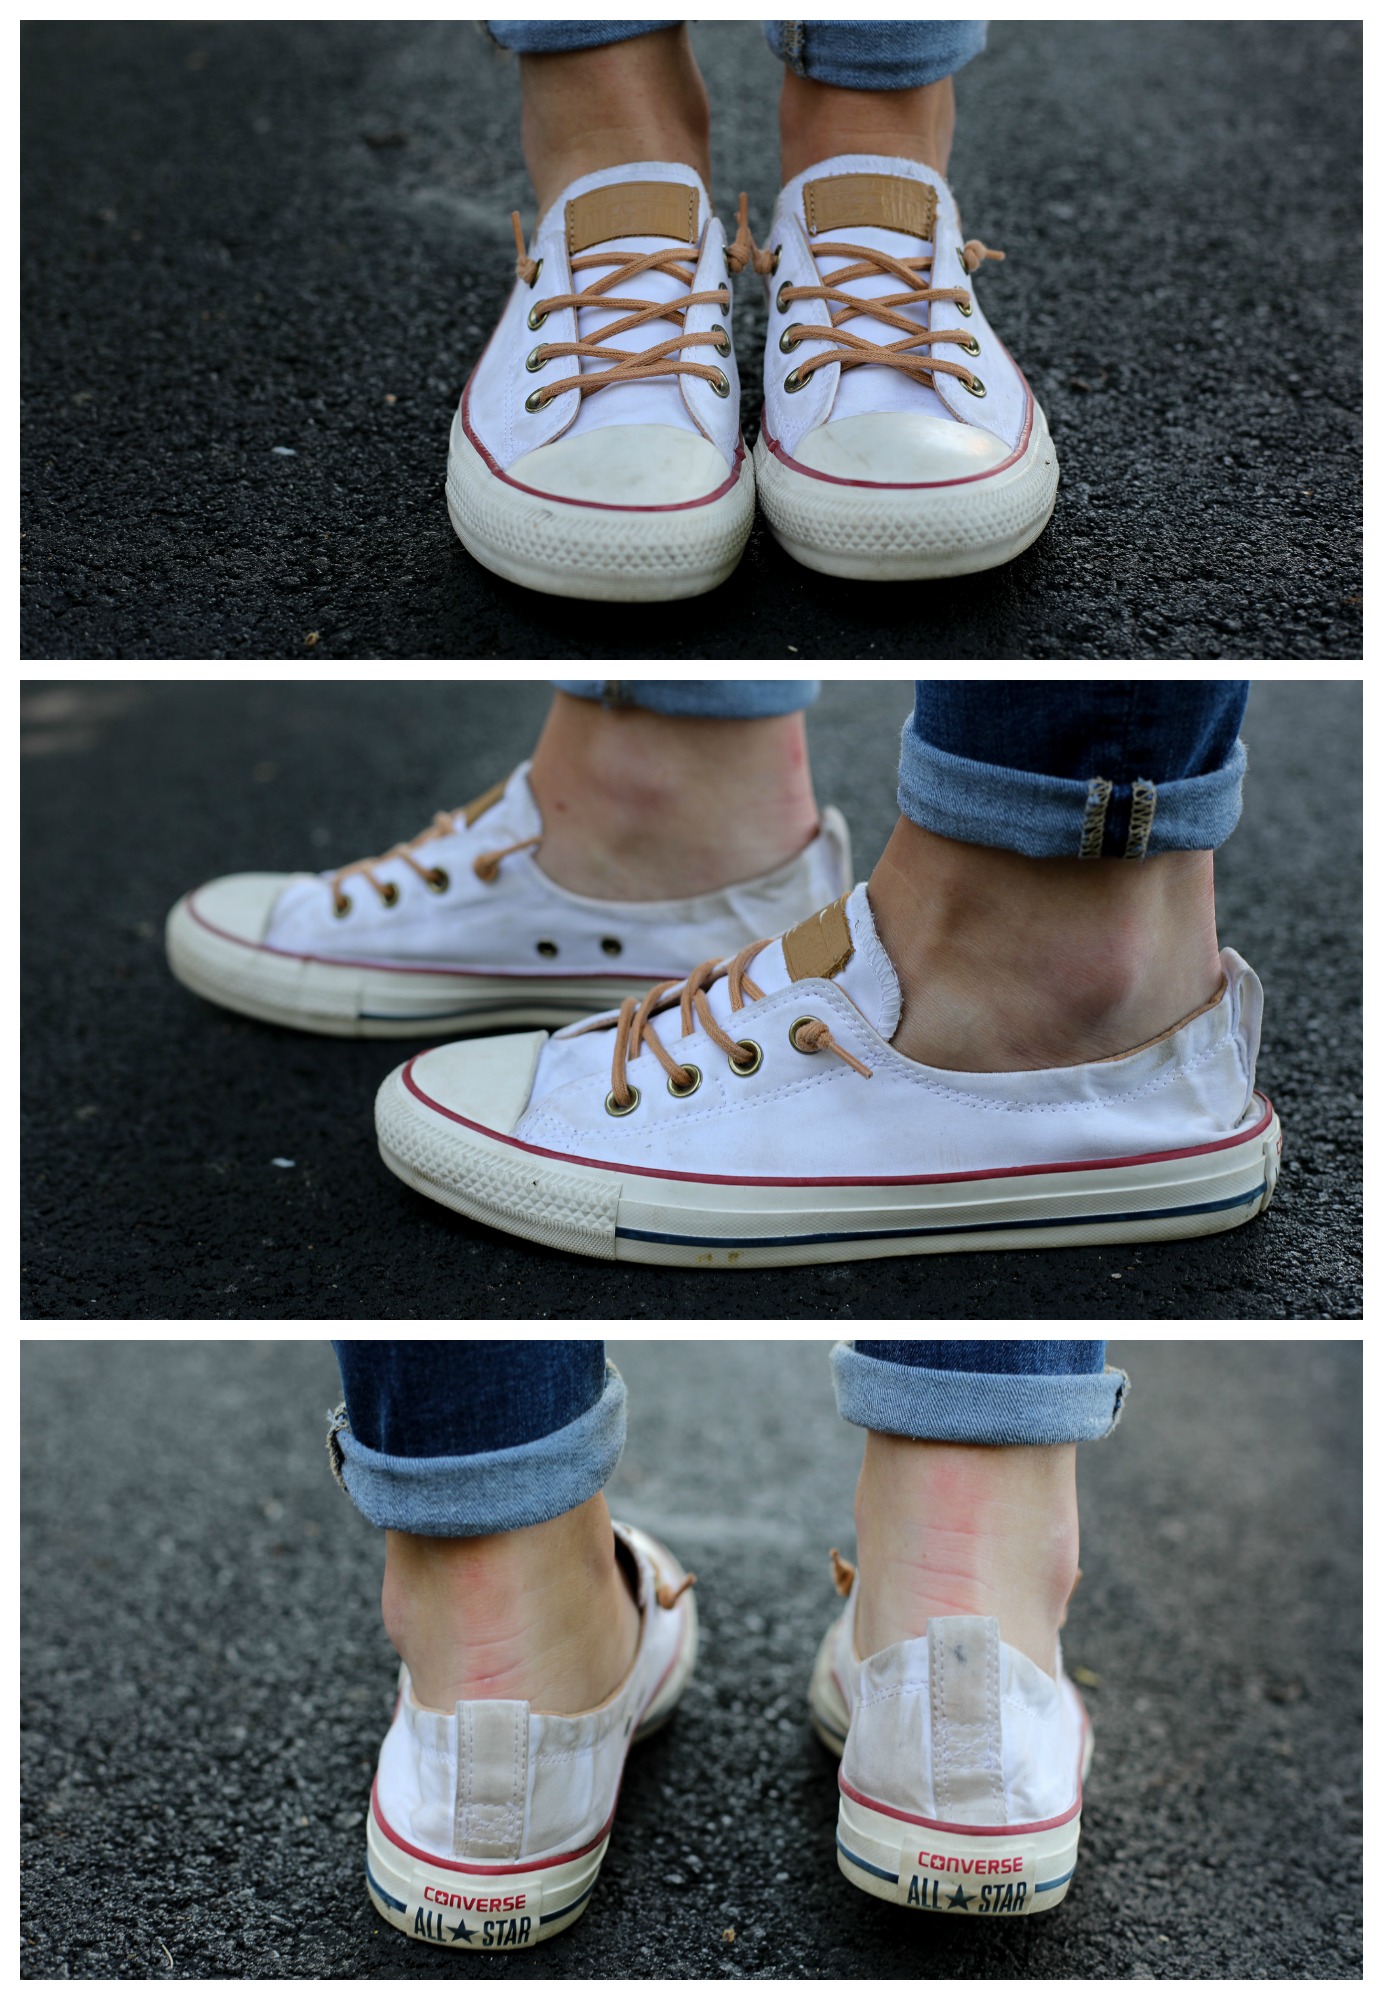 How To Turn Yellow Converse White Again How to Clean Your Converse [6 Methods Put To The Test!] - Living in Yellow